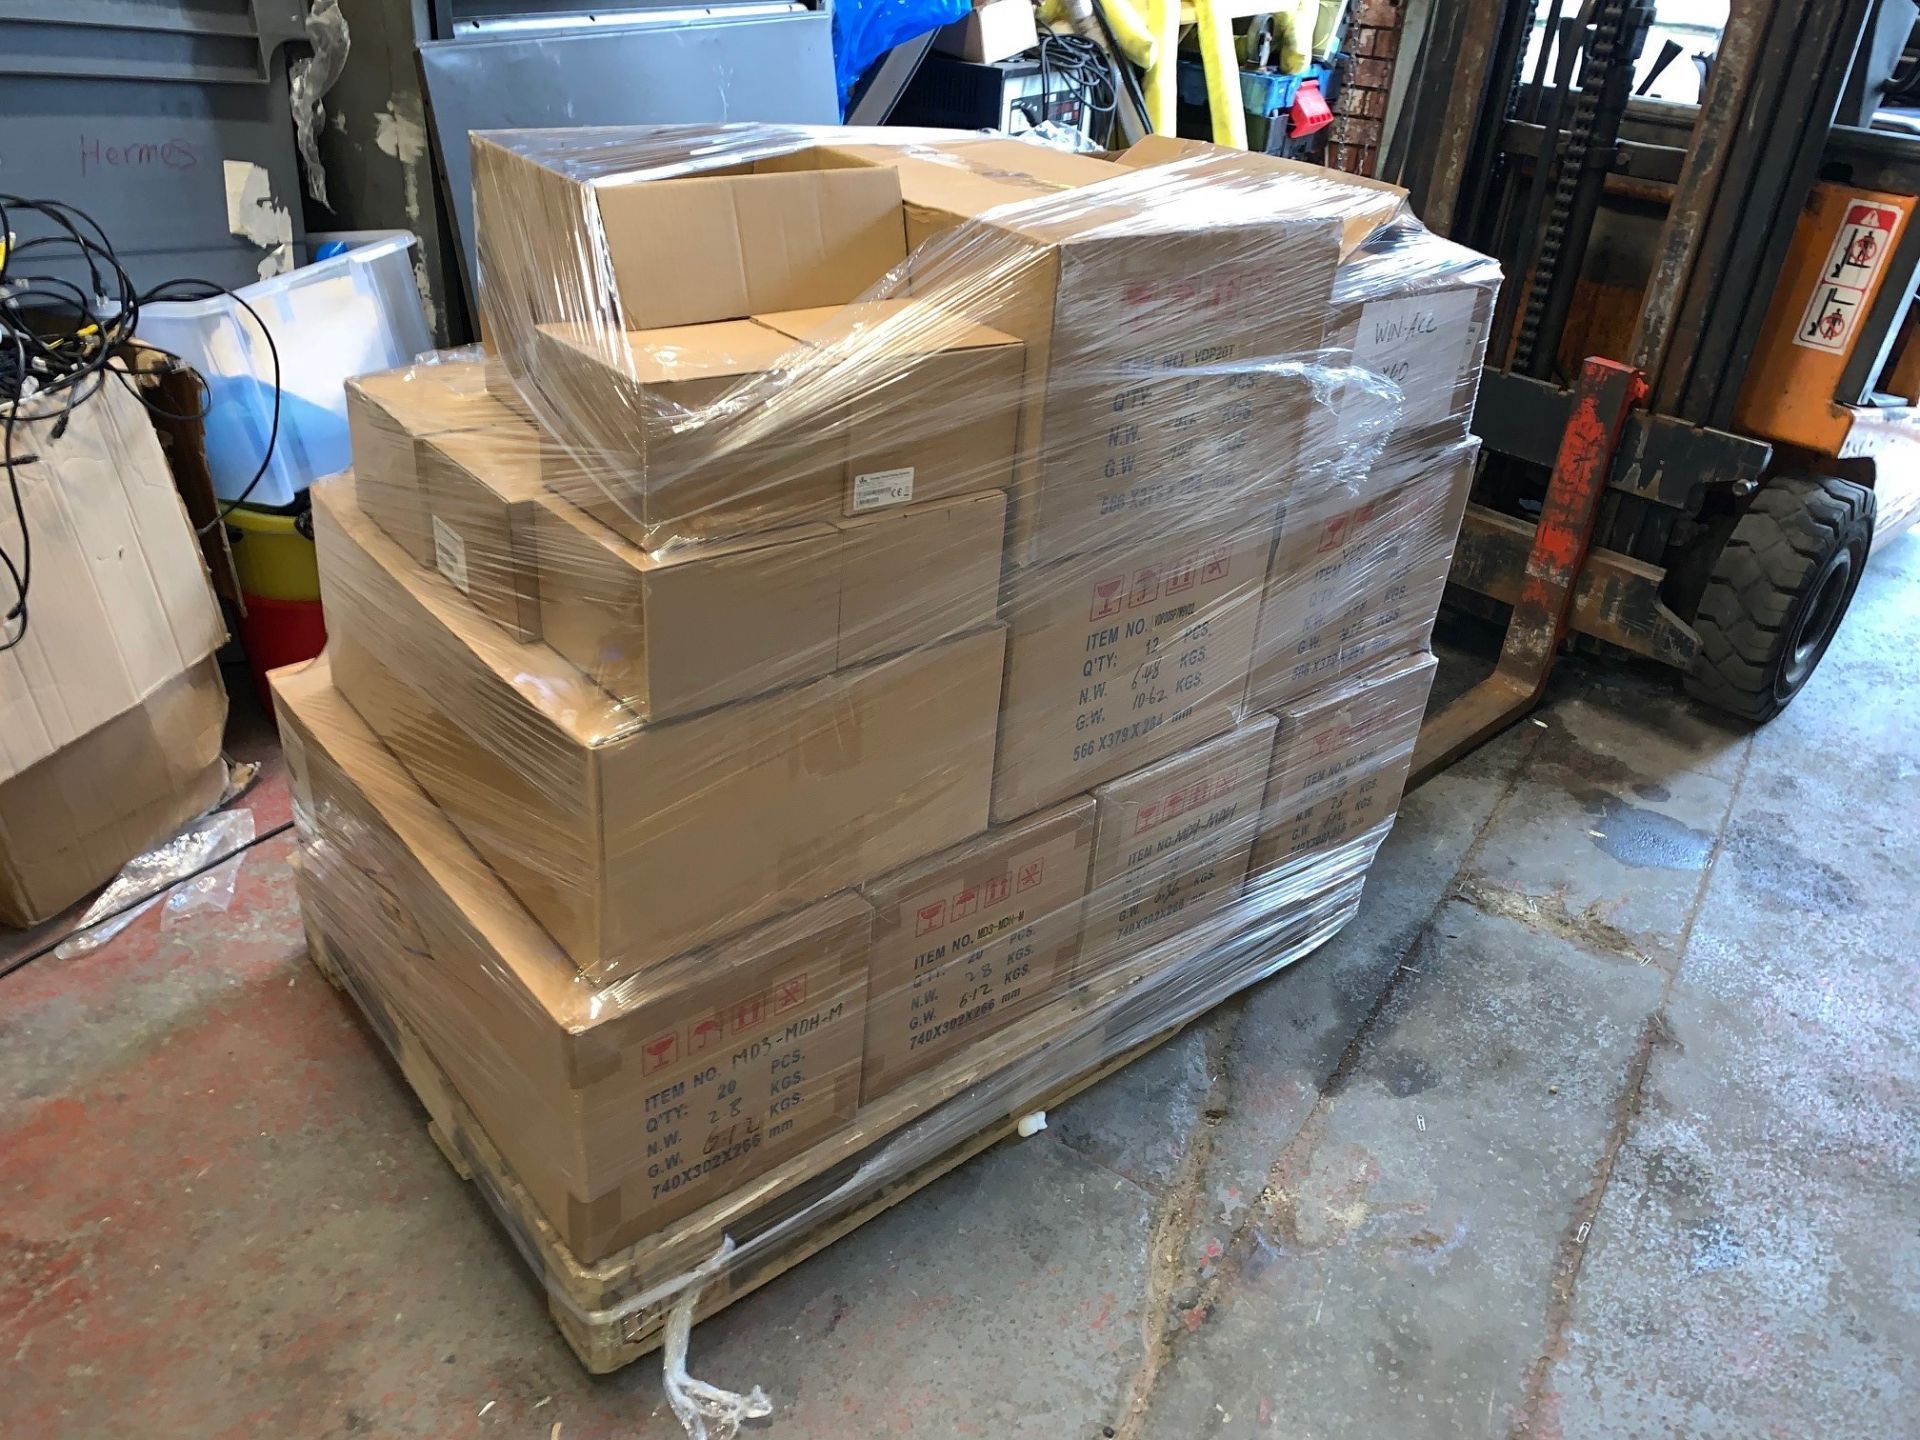 1 x Pallet of Mixed CCTV Equipment Including Dome Cameras, Bullet Cameras, ATM Cameras, Dummy Domes, - Image 2 of 2